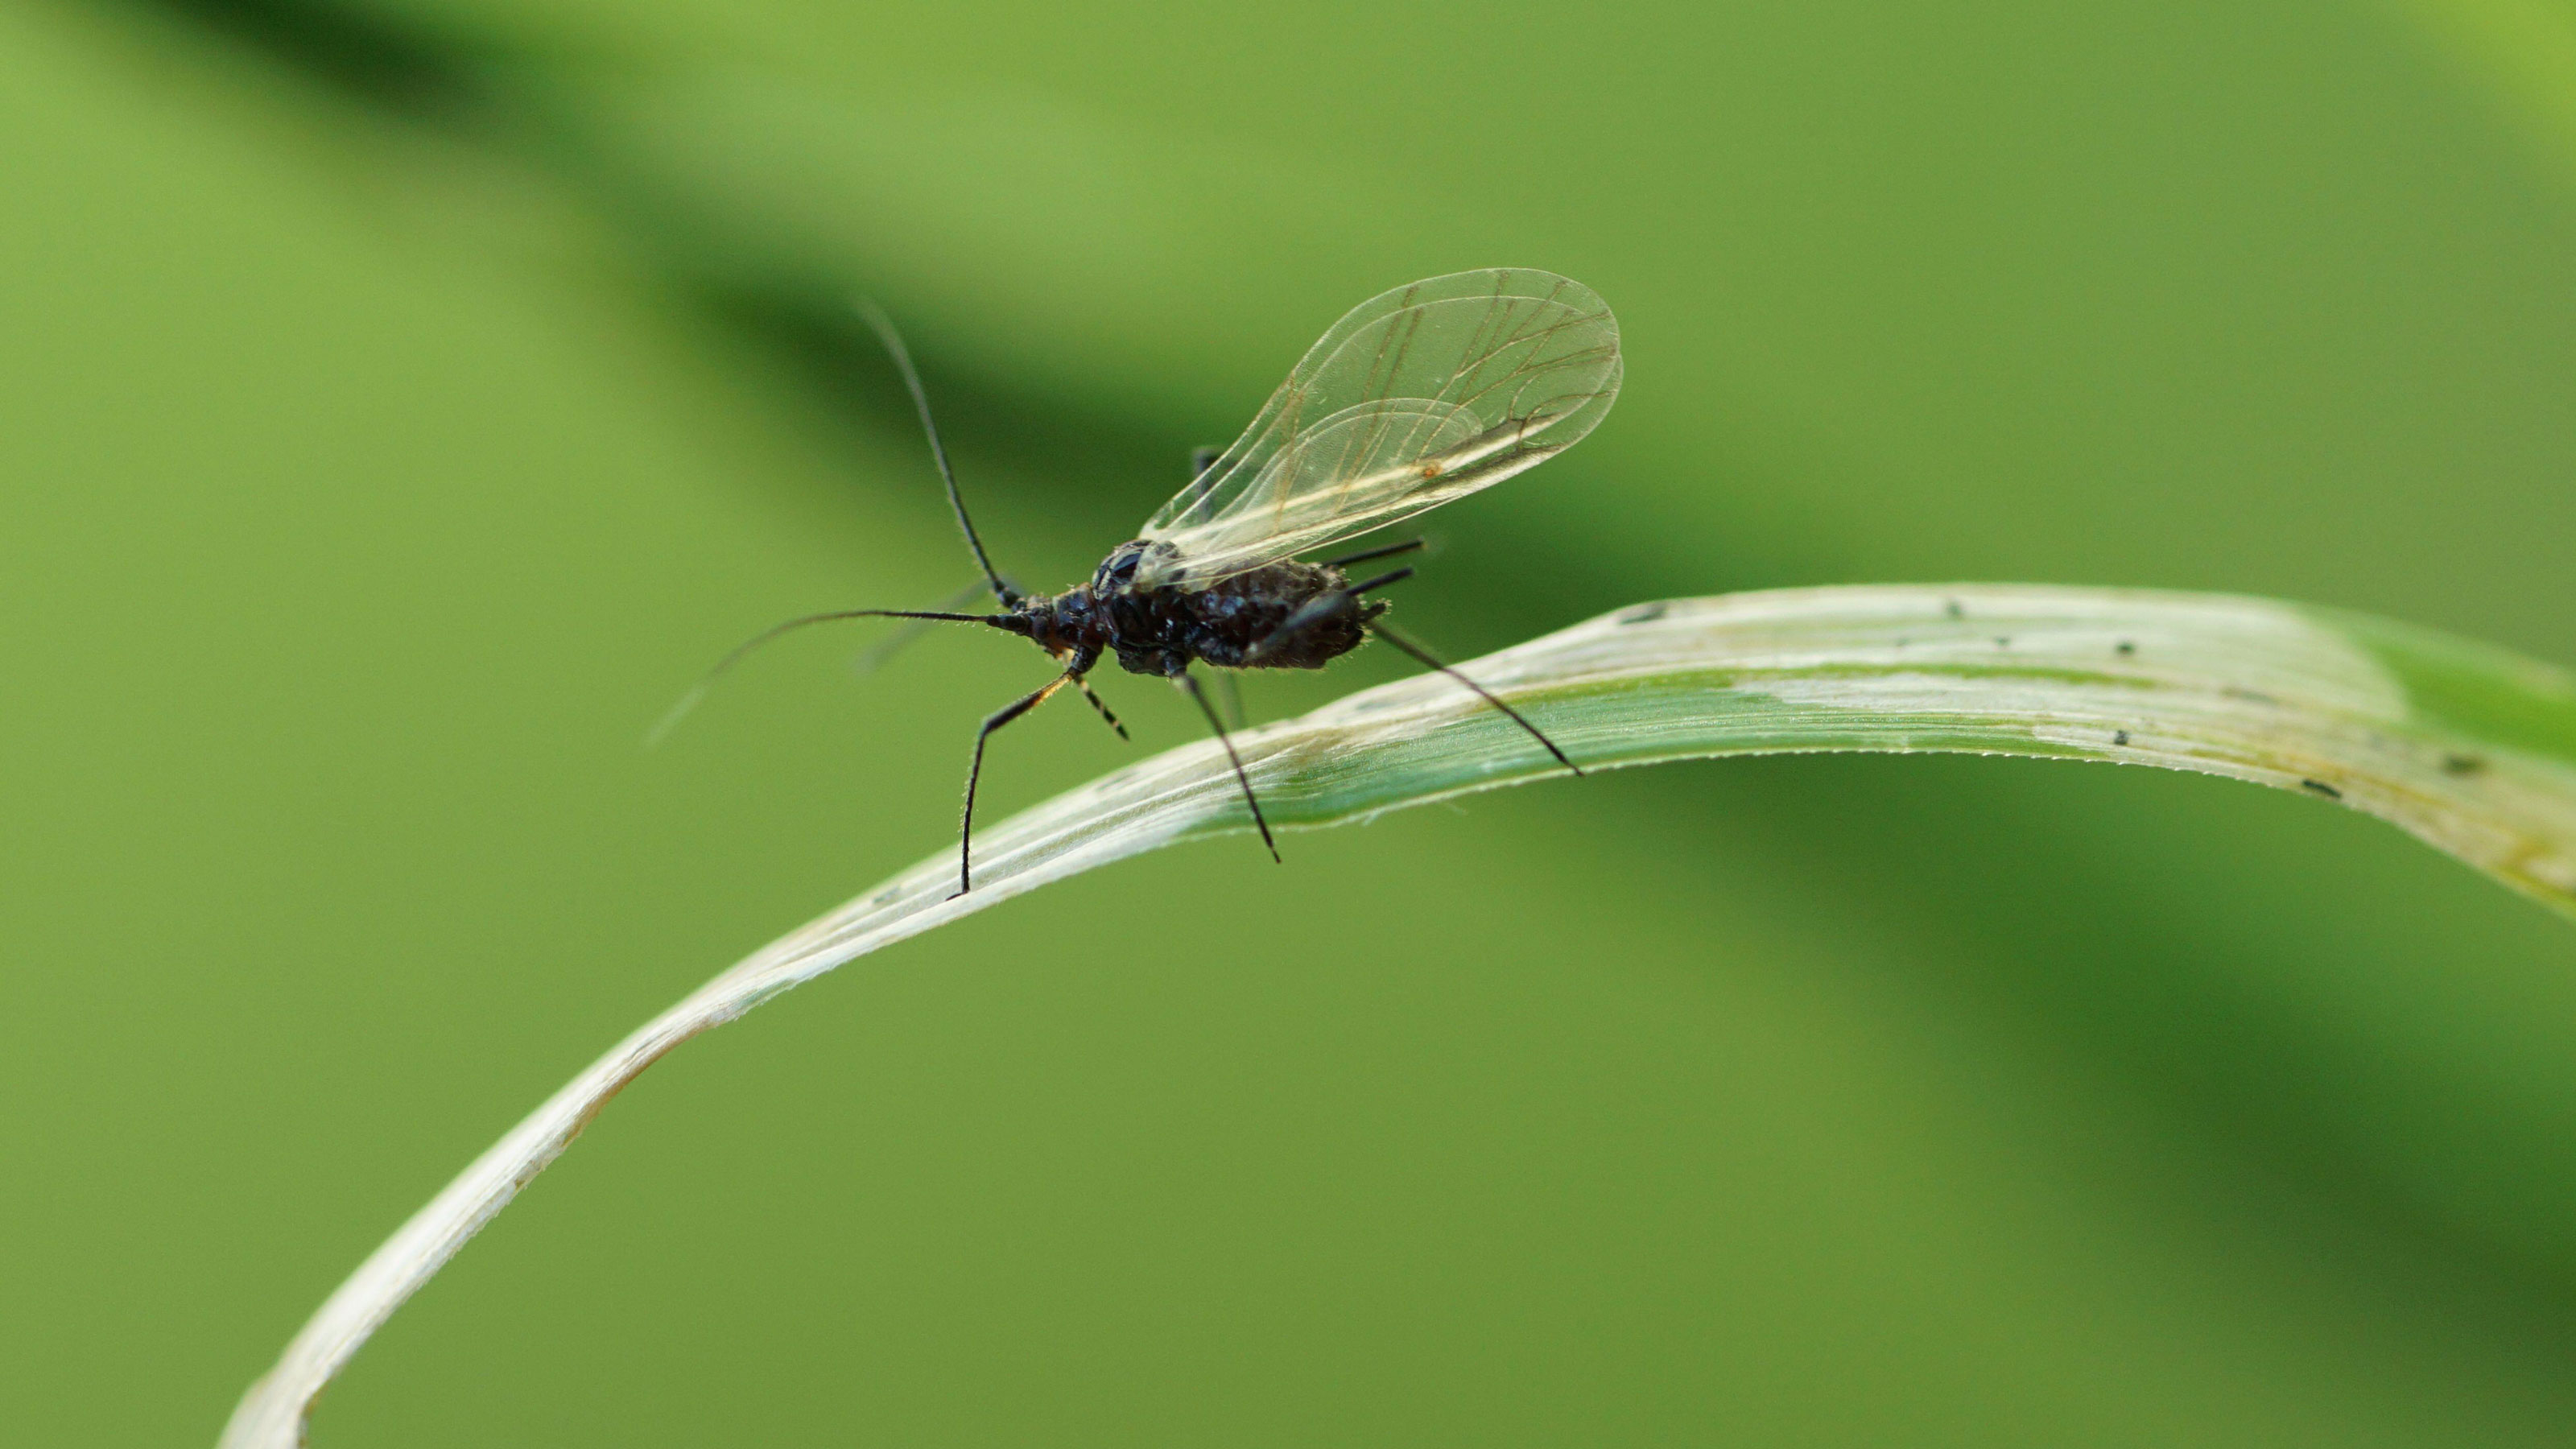 Home remedies for getting rid of gnats: 5 swift solutions